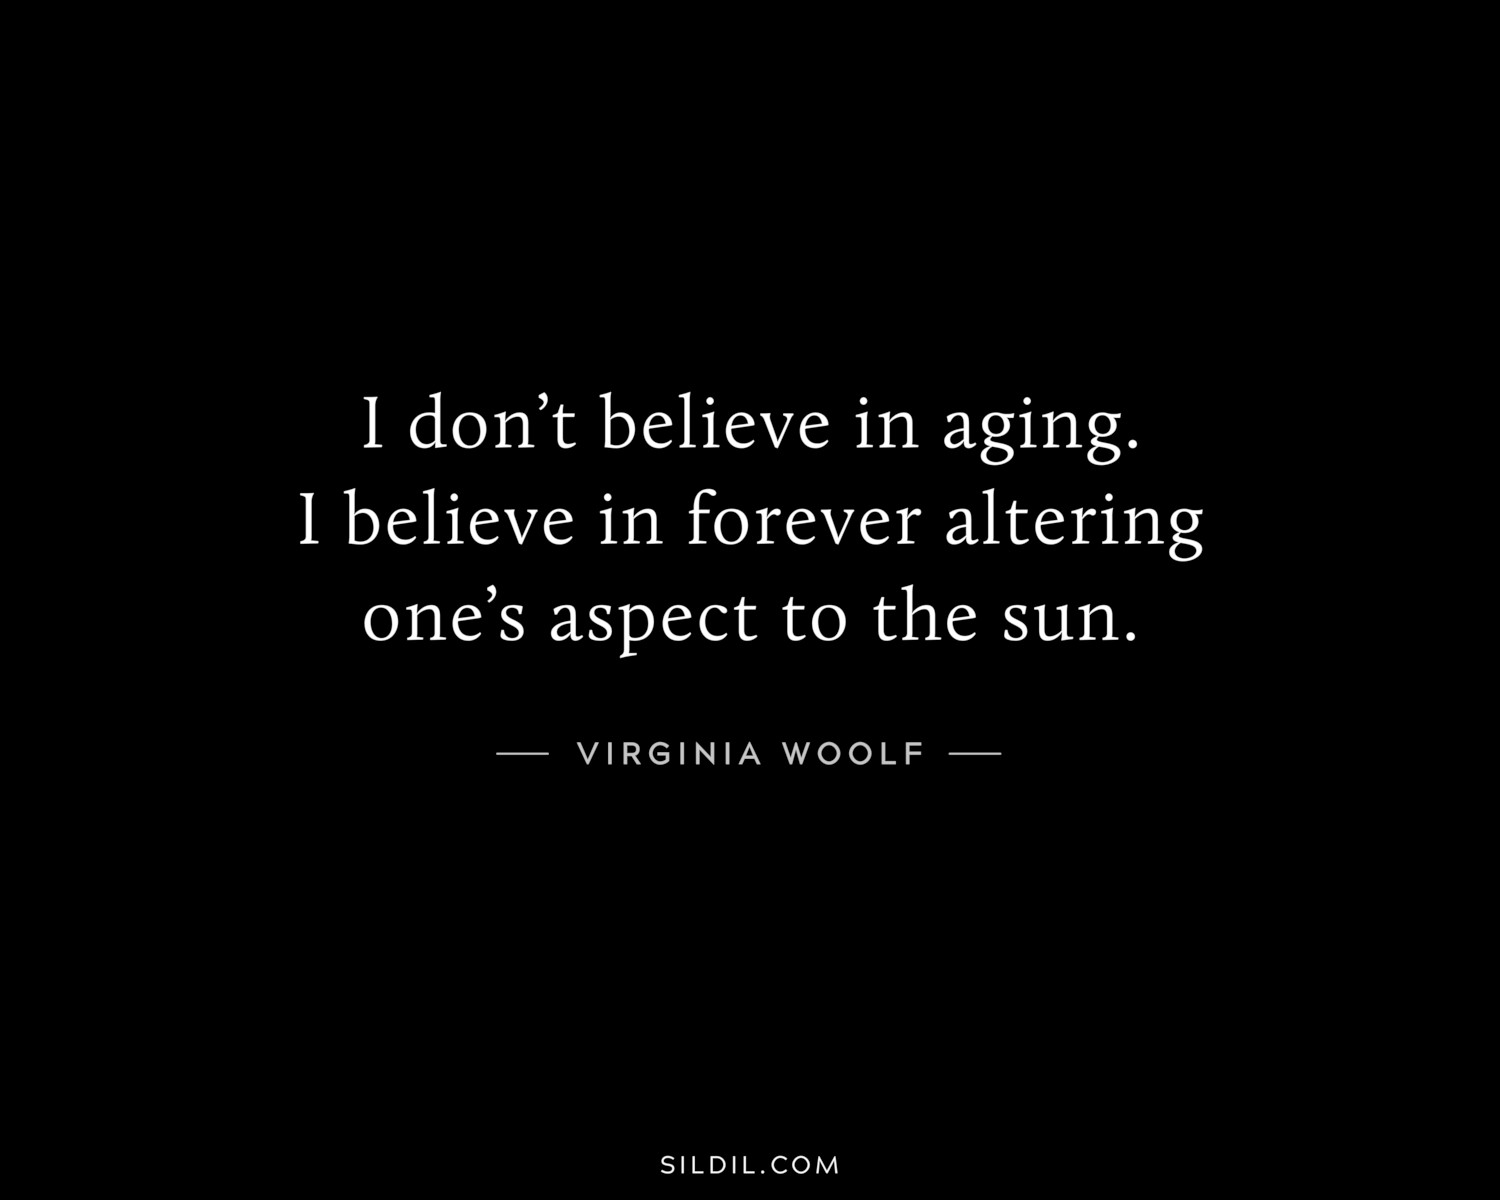 I don’t believe in aging. I believe in forever altering one’s aspect to the sun.